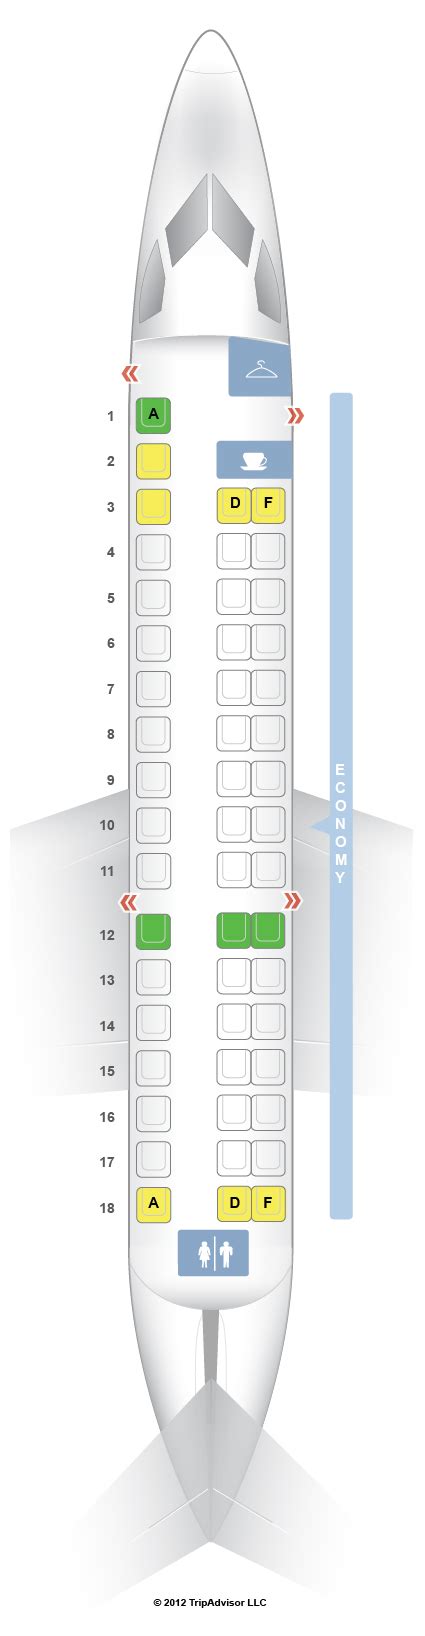 Erj 145 seat map. Things To Know About Erj 145 seat map. 